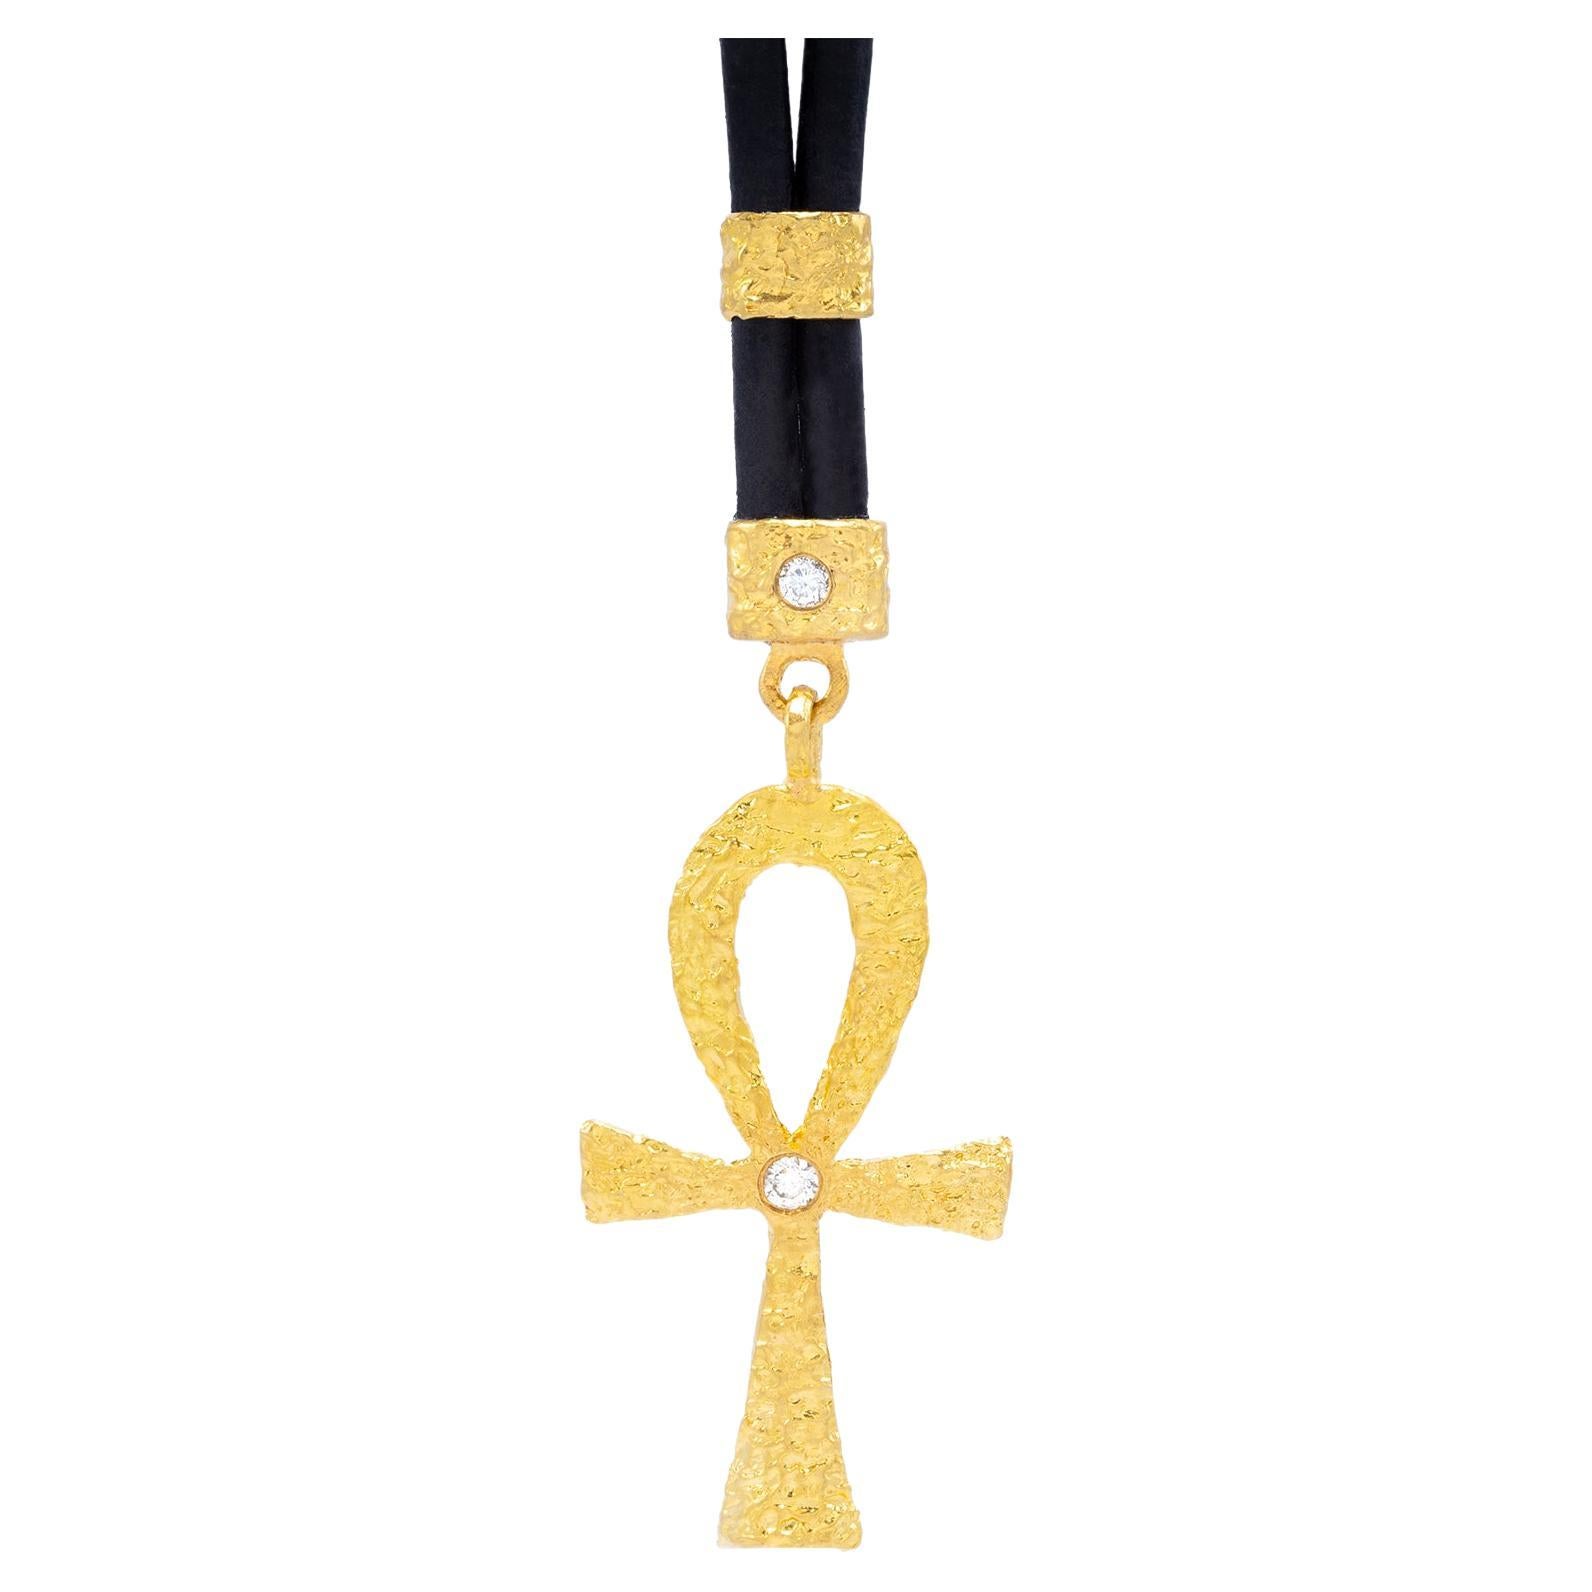 Allegra Ankh Pendant in 22k Gold, by Tagili For Sale